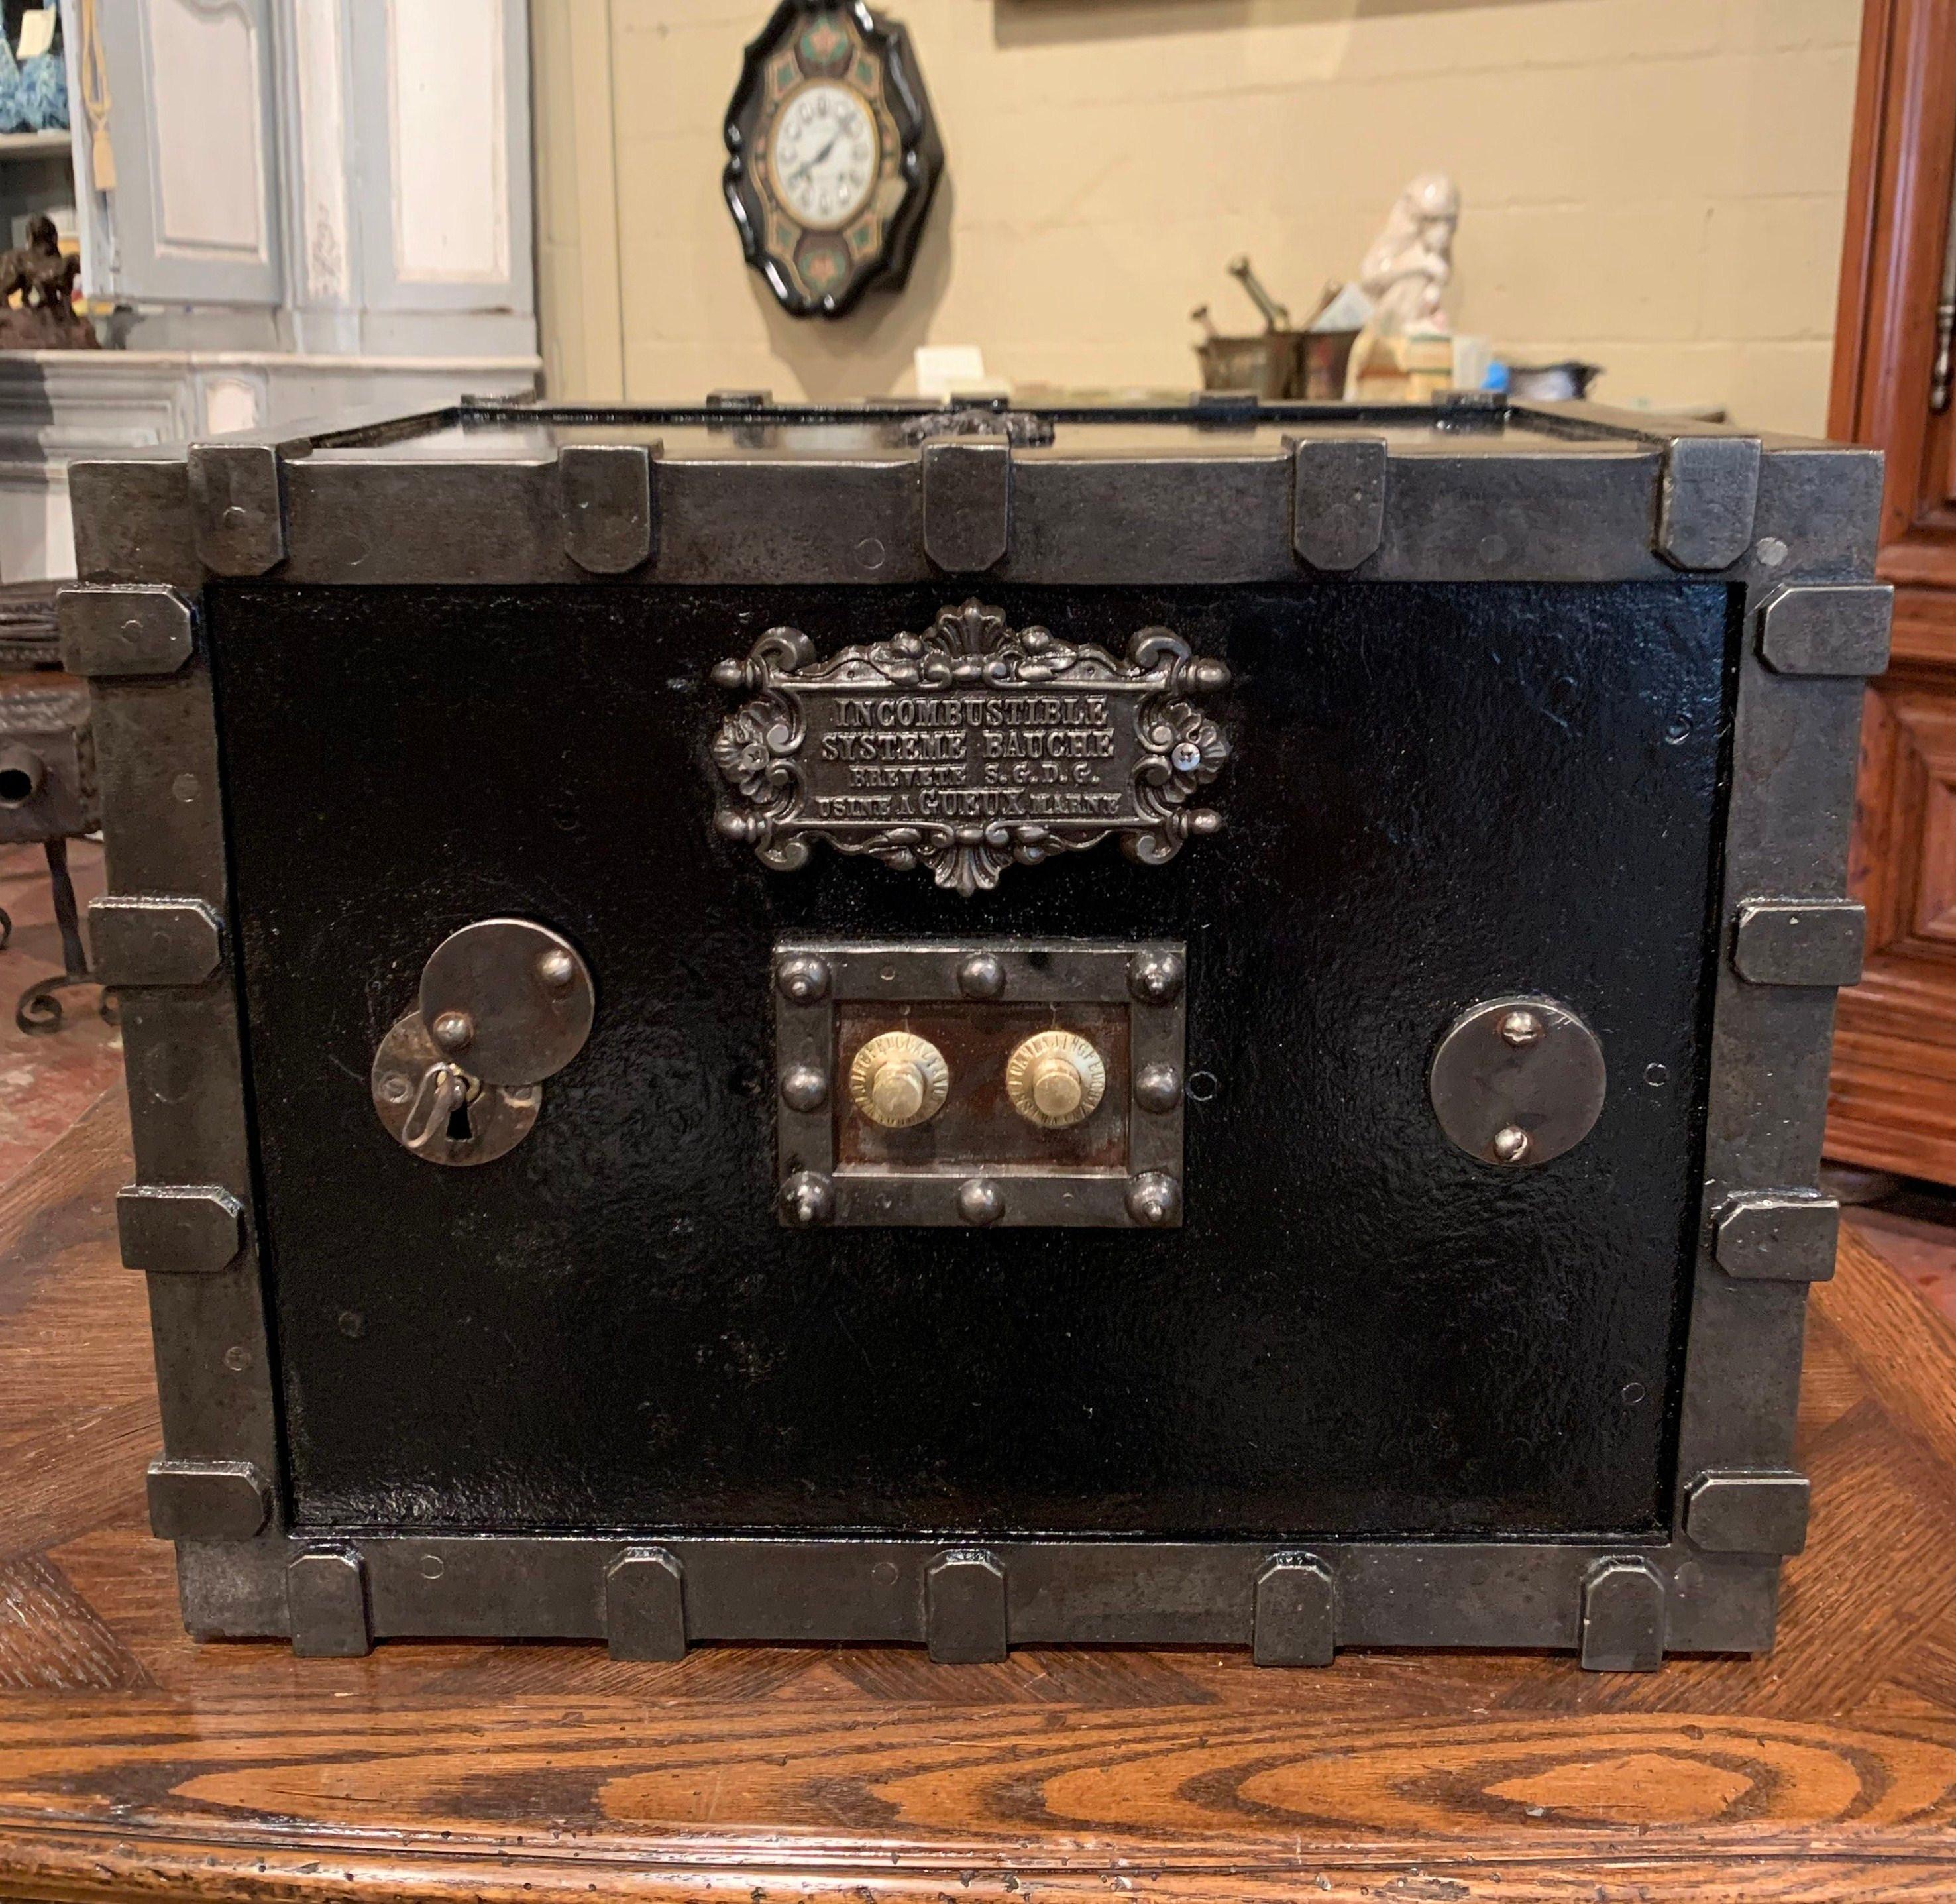 Keep your jewelry and important documents locked up in this elegant, antique safe from the Champagne-Ardenne region of France. Crafted circa 1880 in cast iron with gun barrel finish and finished on all sides, this travel safe is decorated with